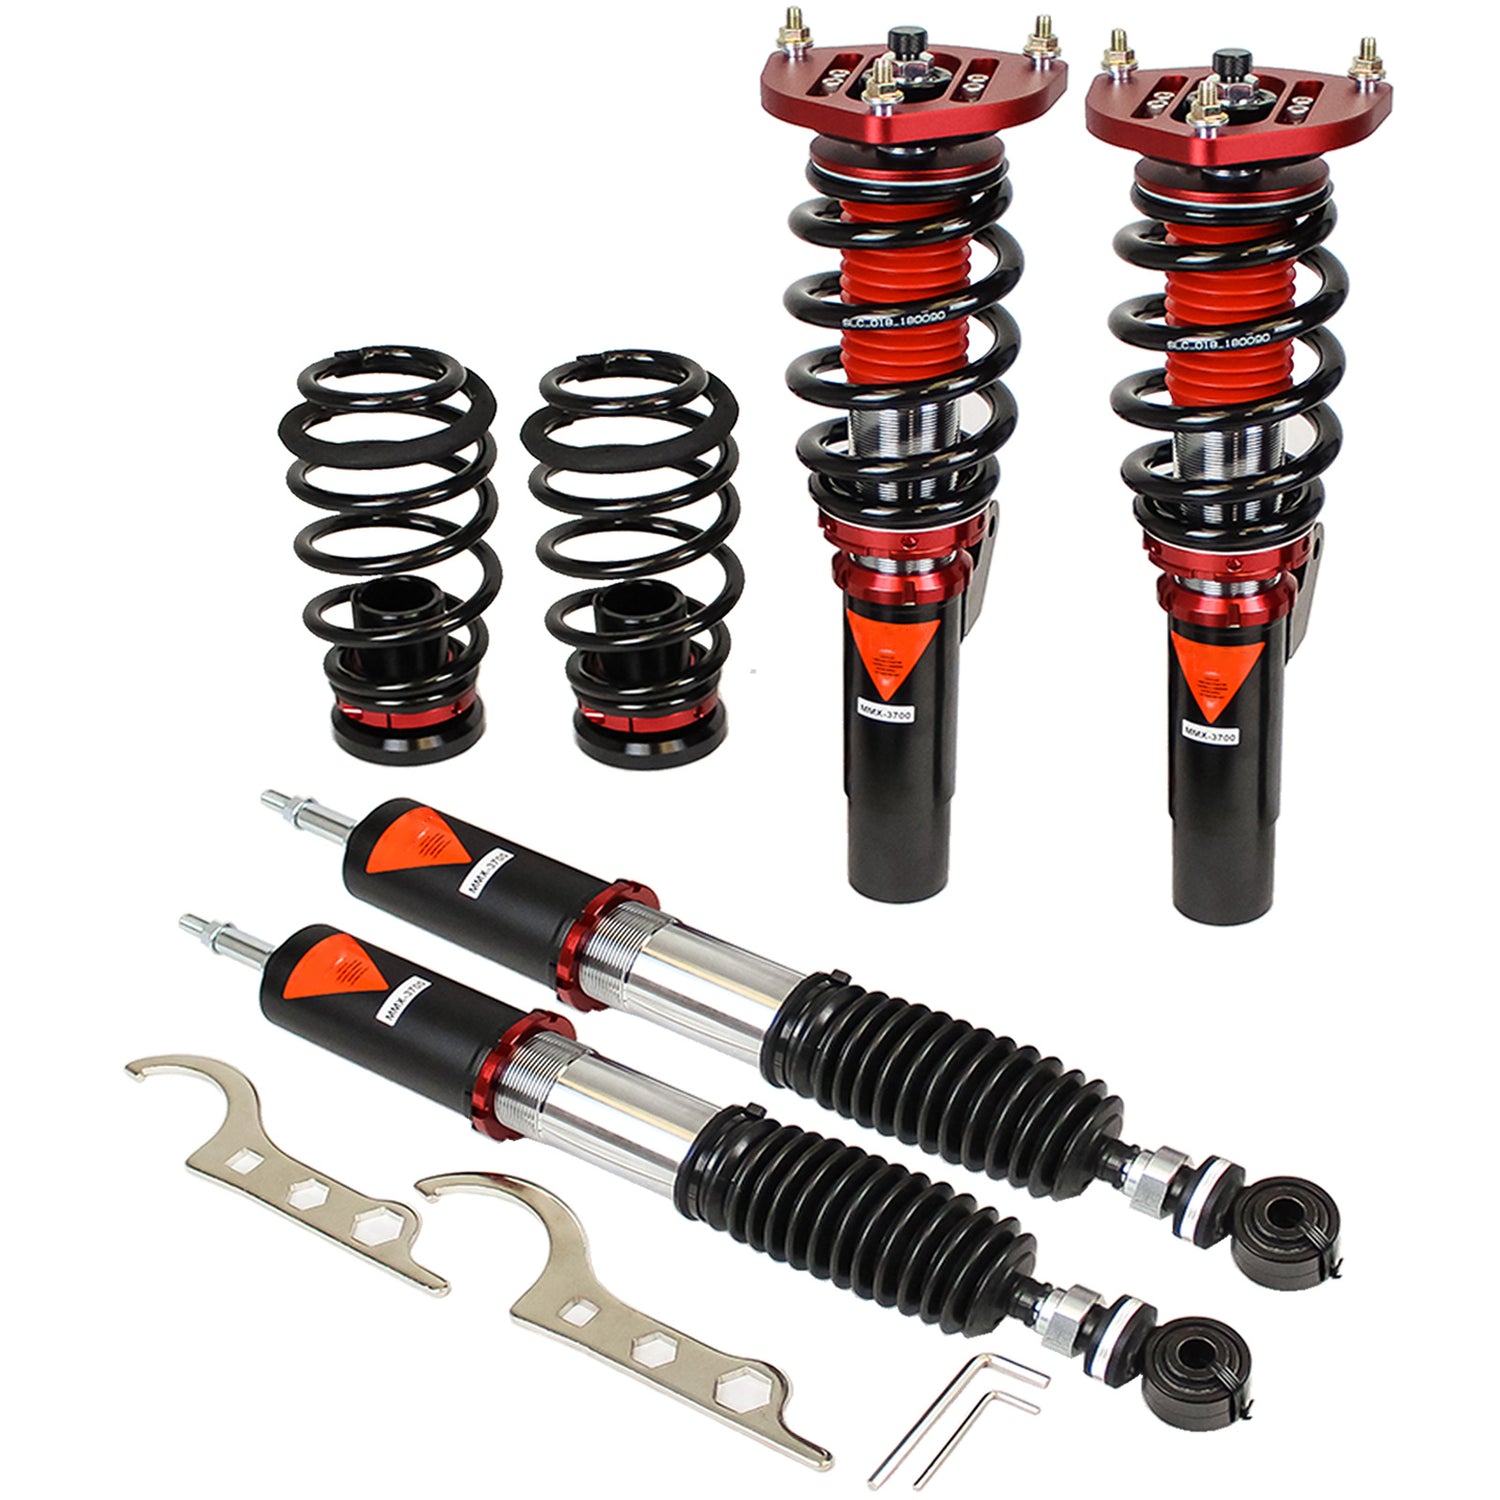 MMX3700-A MAXX Coilovers Lowering Kit, Fully Adjustable, Ride Height, 40 Clicks Rebound Settings, Volkswagen Passat(B6) 06-10